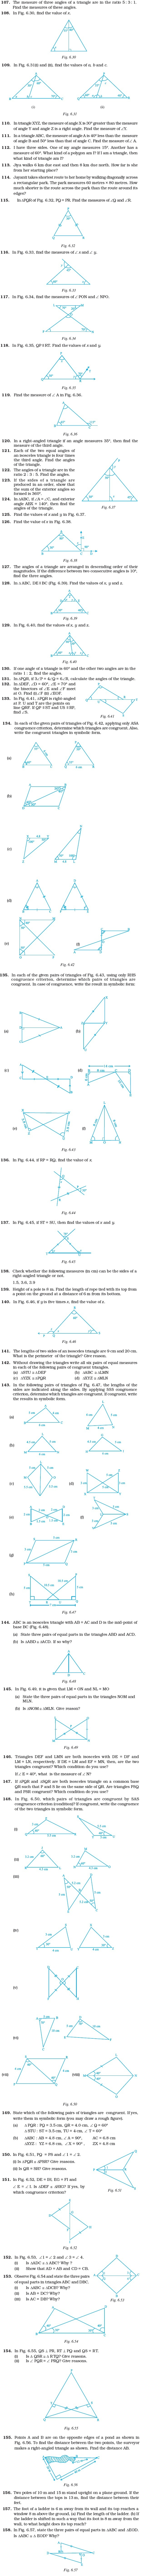 Class 7 Important Questions for Maths – Triangles